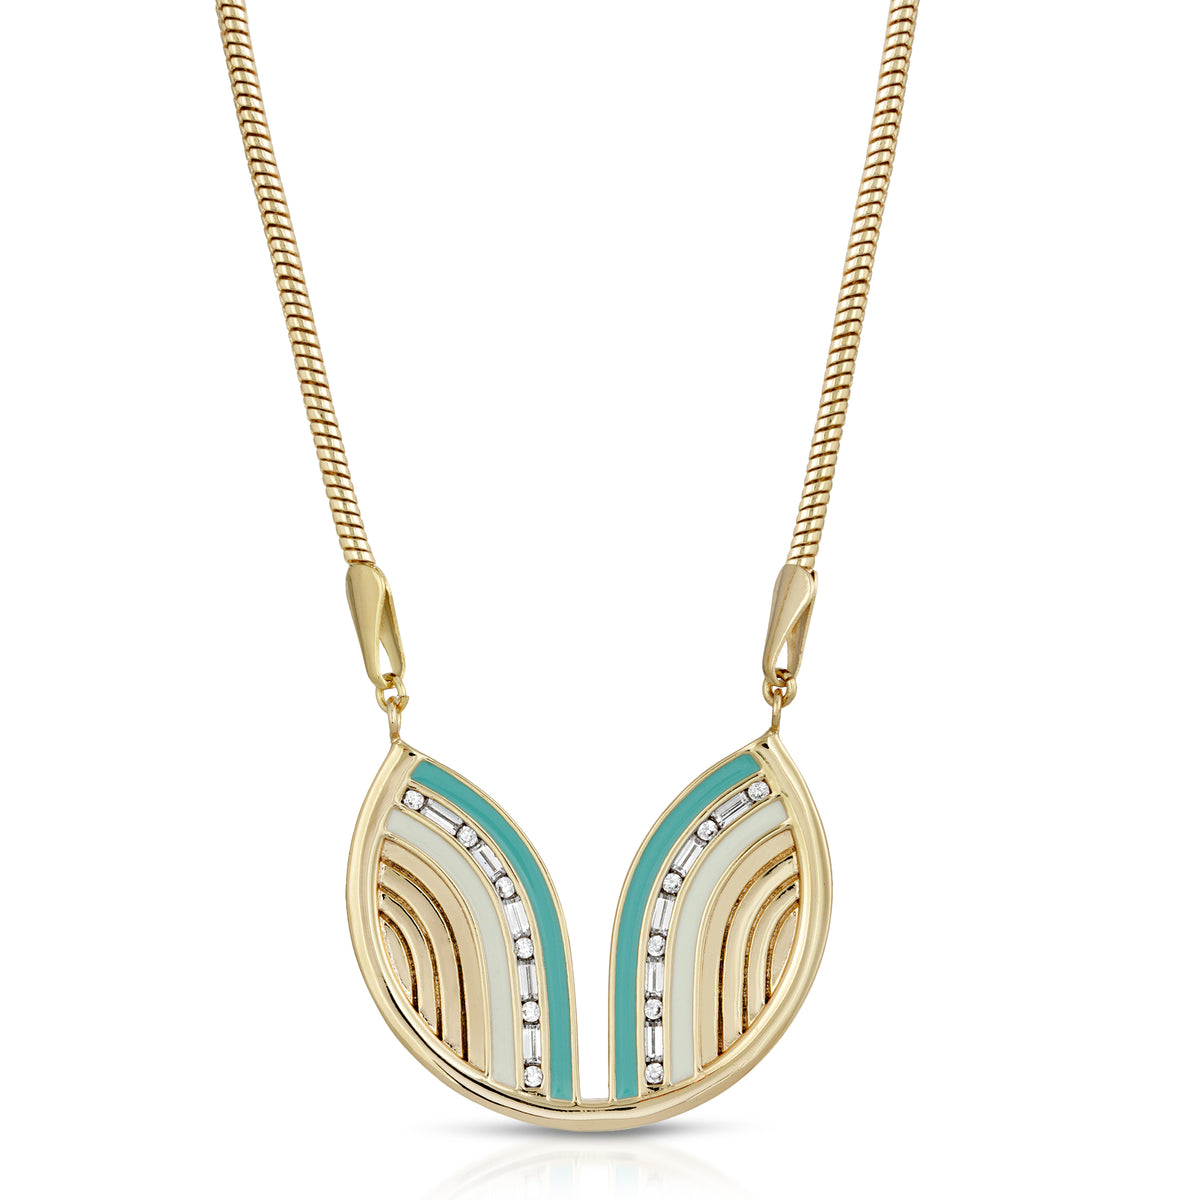 South Beach Necklace - Turquoise/White